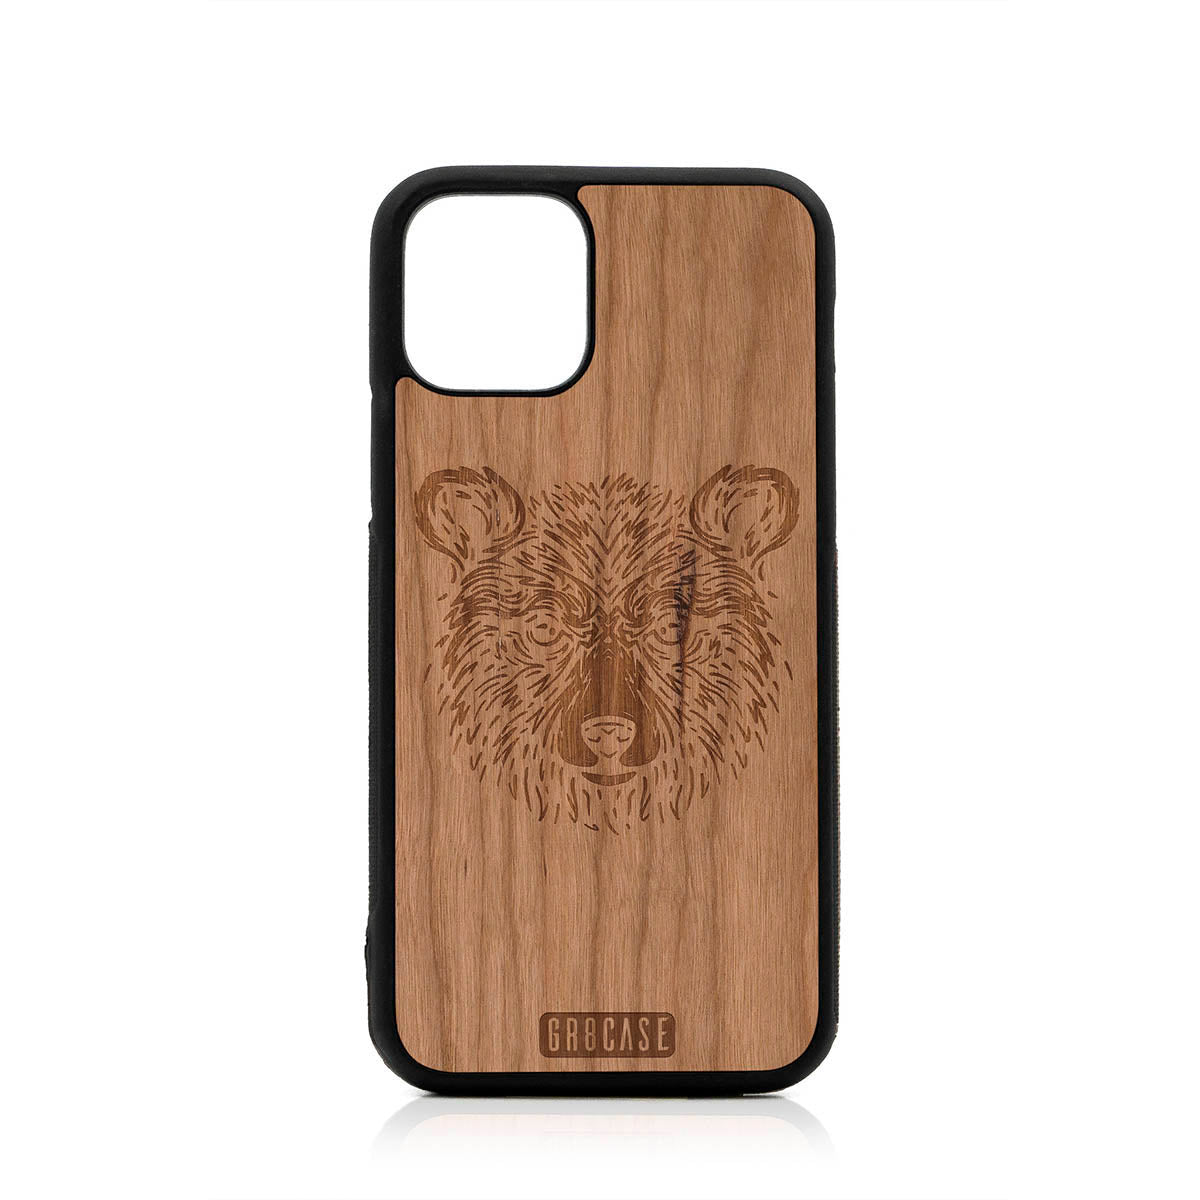 Furry Bear Design Wood Case For iPhone 11 Pro